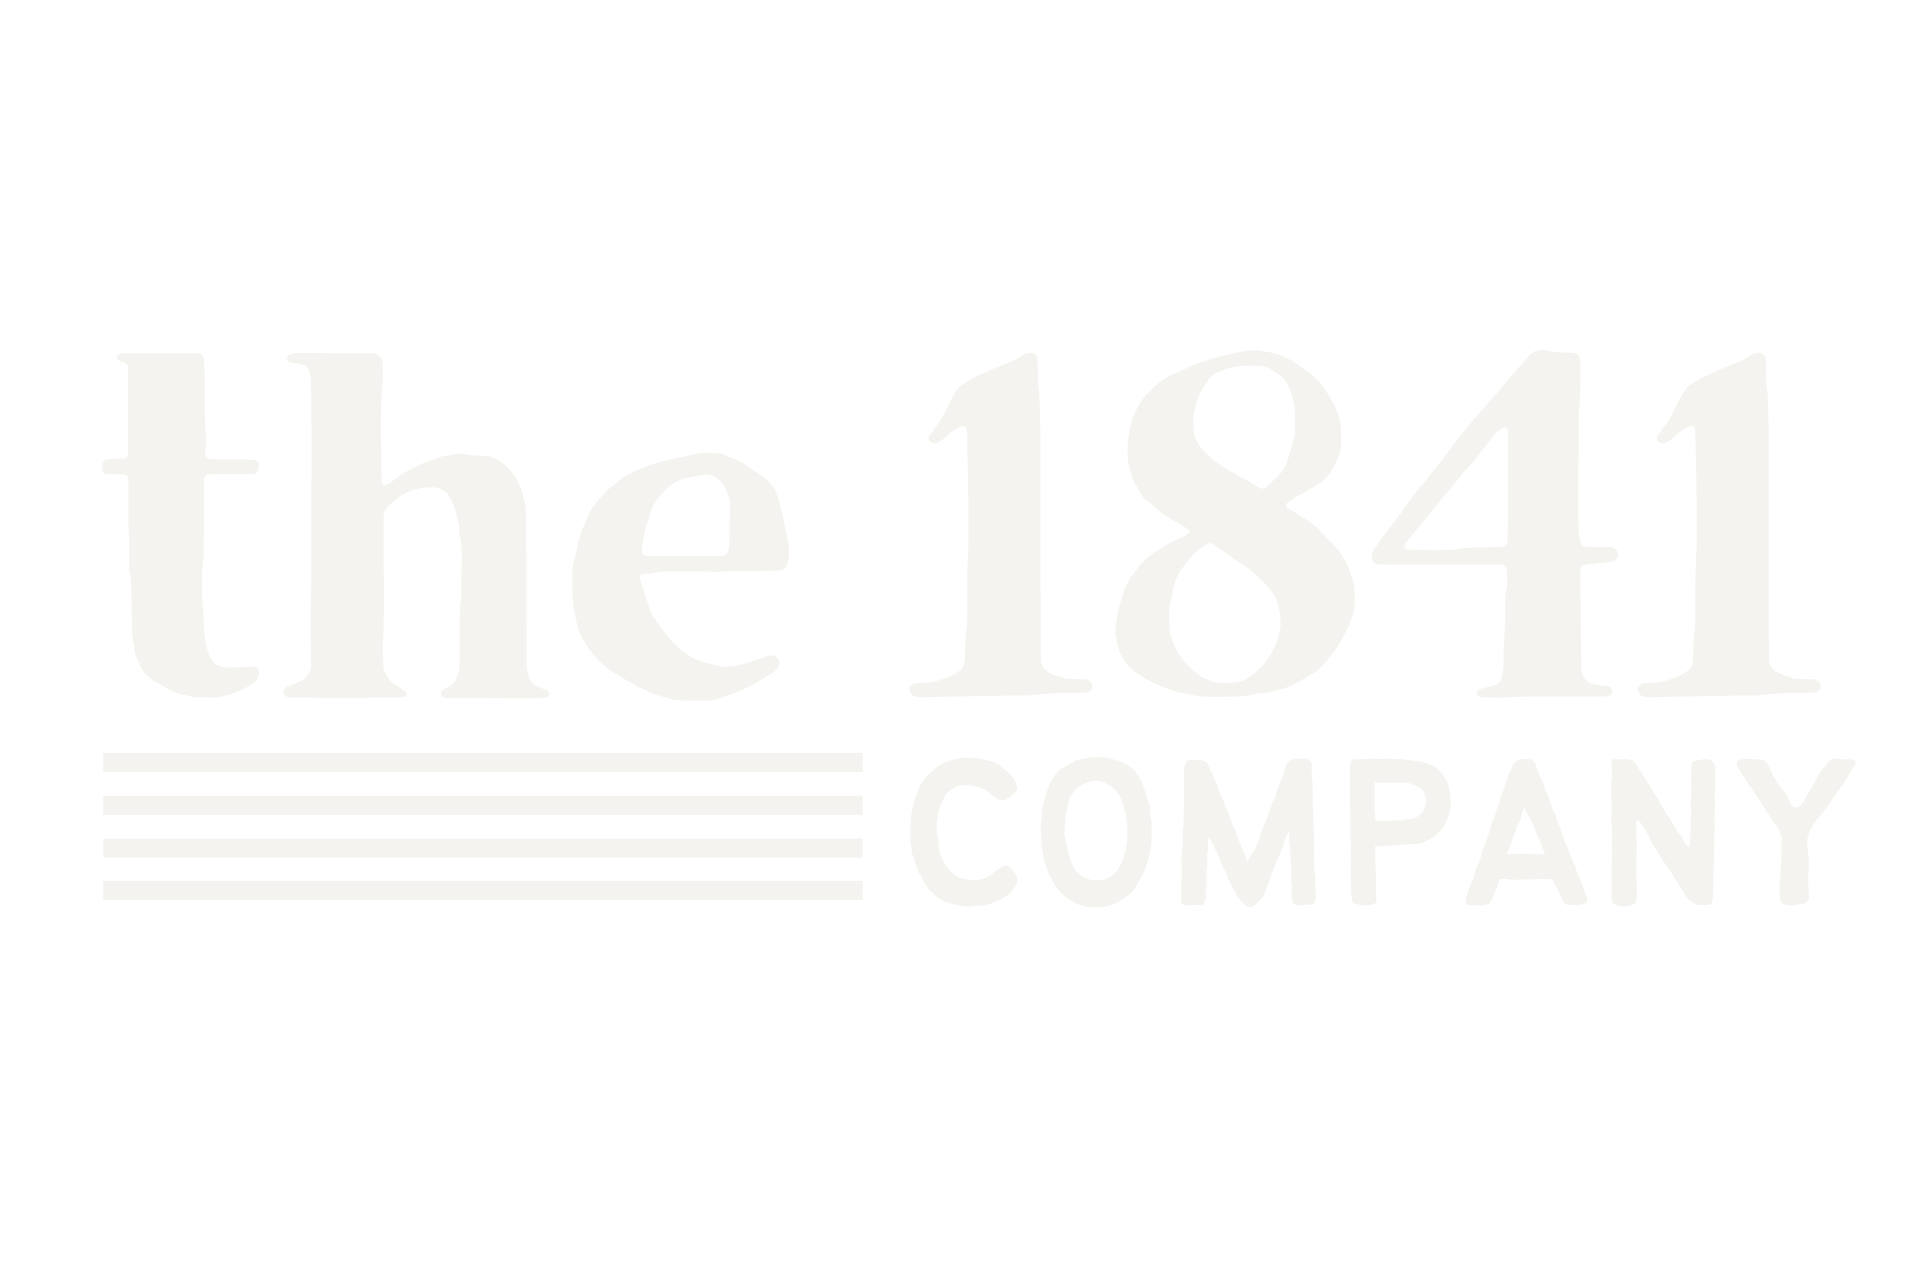 A white logo for the 1841 company on a white background.